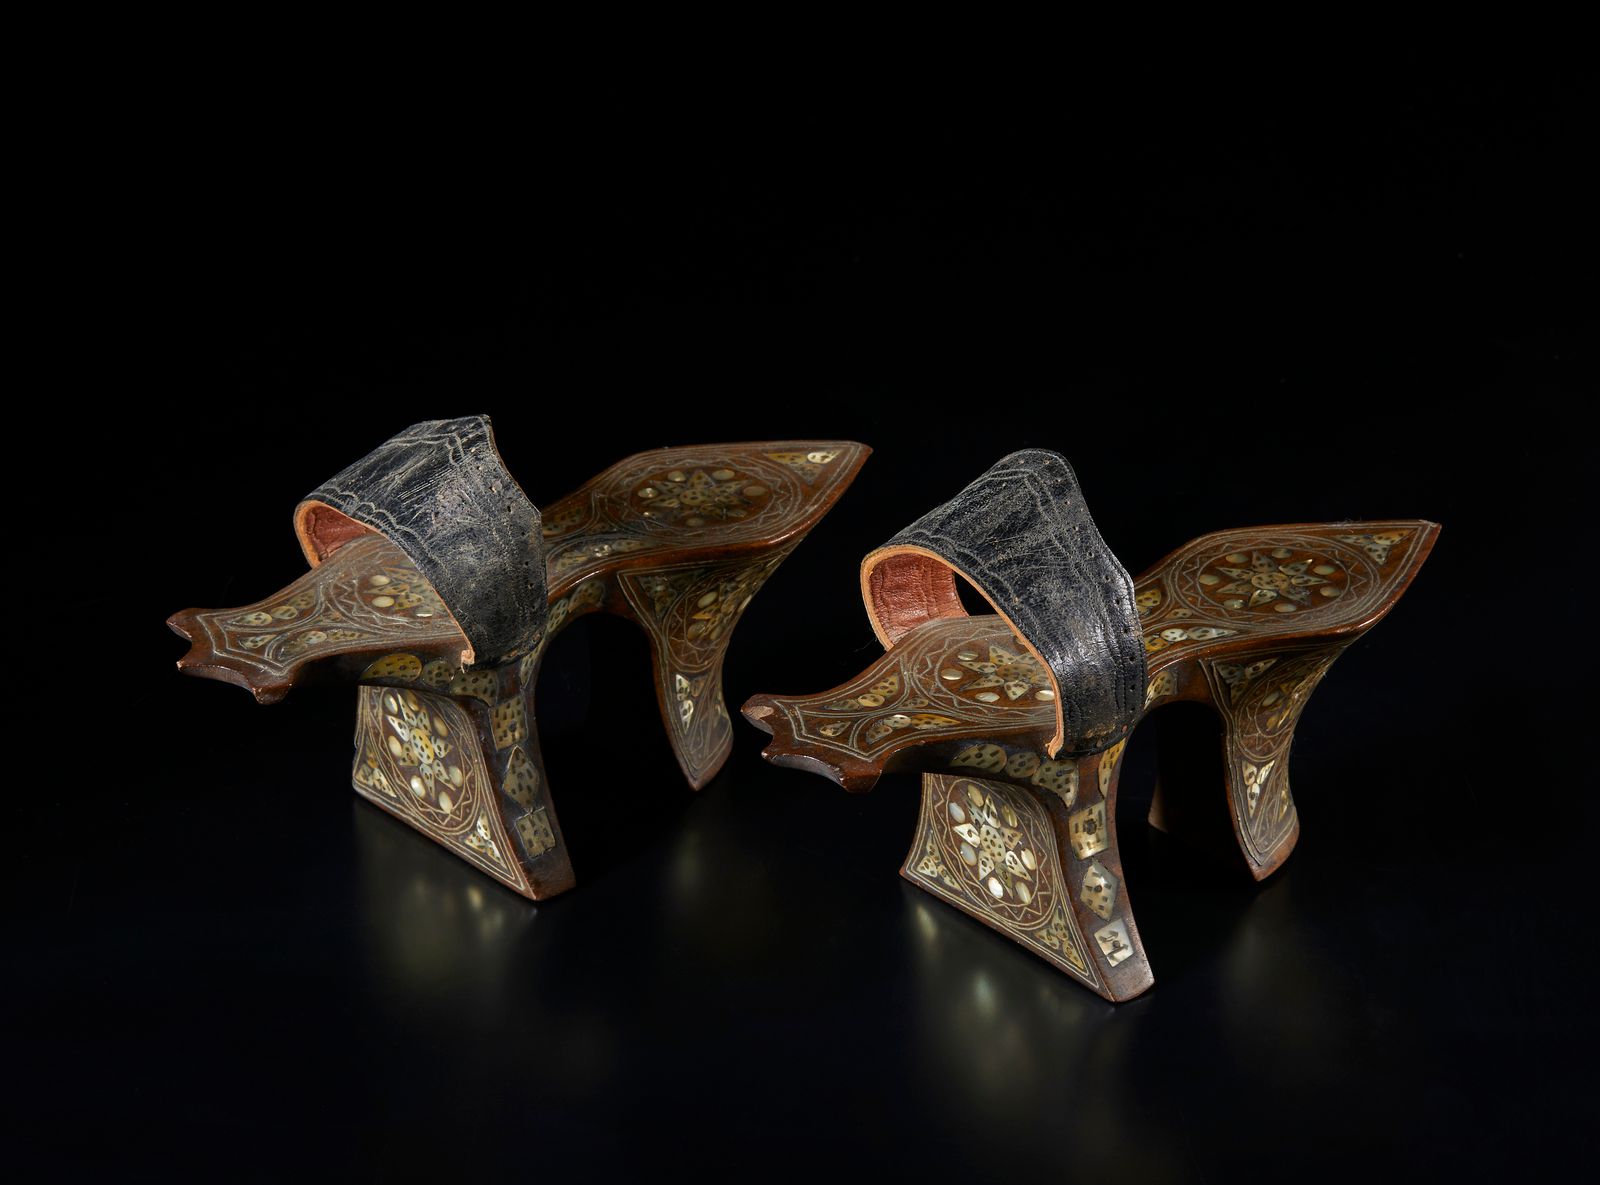 Islamic Art A pair of mother-of-pearl inlaid wooden hammam clogs Arte islamica. &hellip;